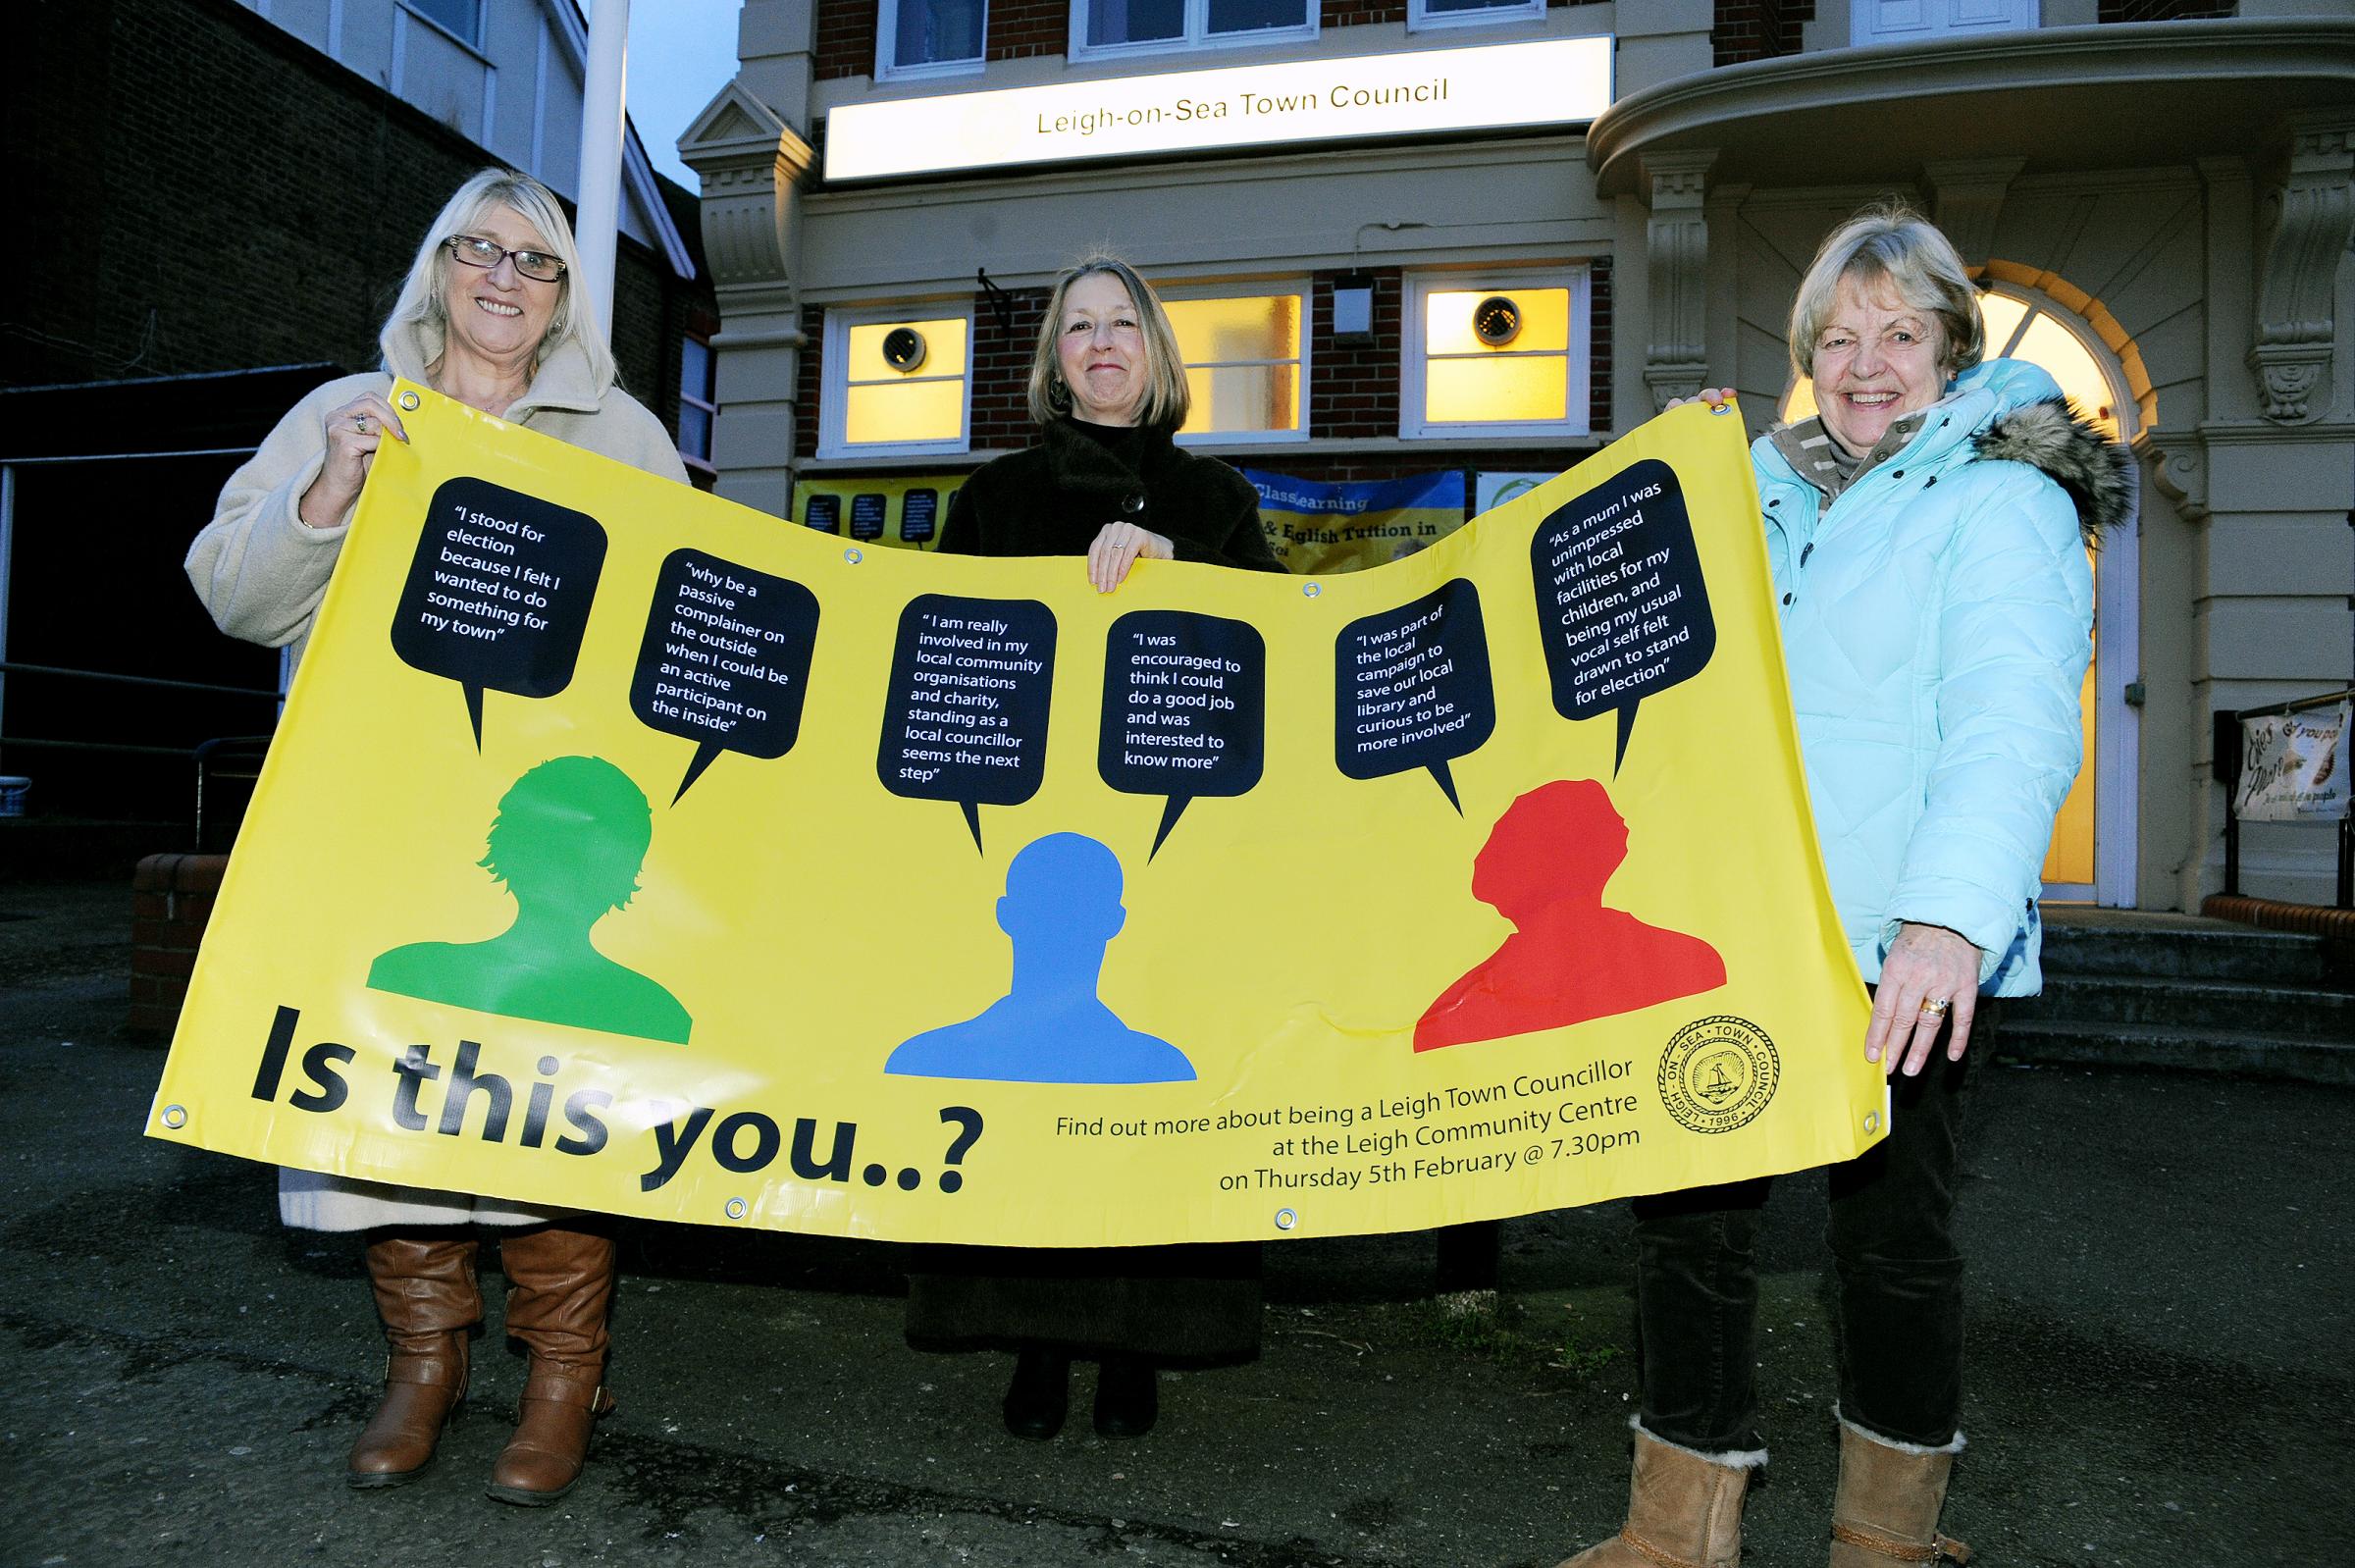 Seeking candidates - Carole Mulroney, Jane Ward and Valerie Morgan (left to right) created this poster in a bid to find potential councillors for Leigh Town Council in 2014